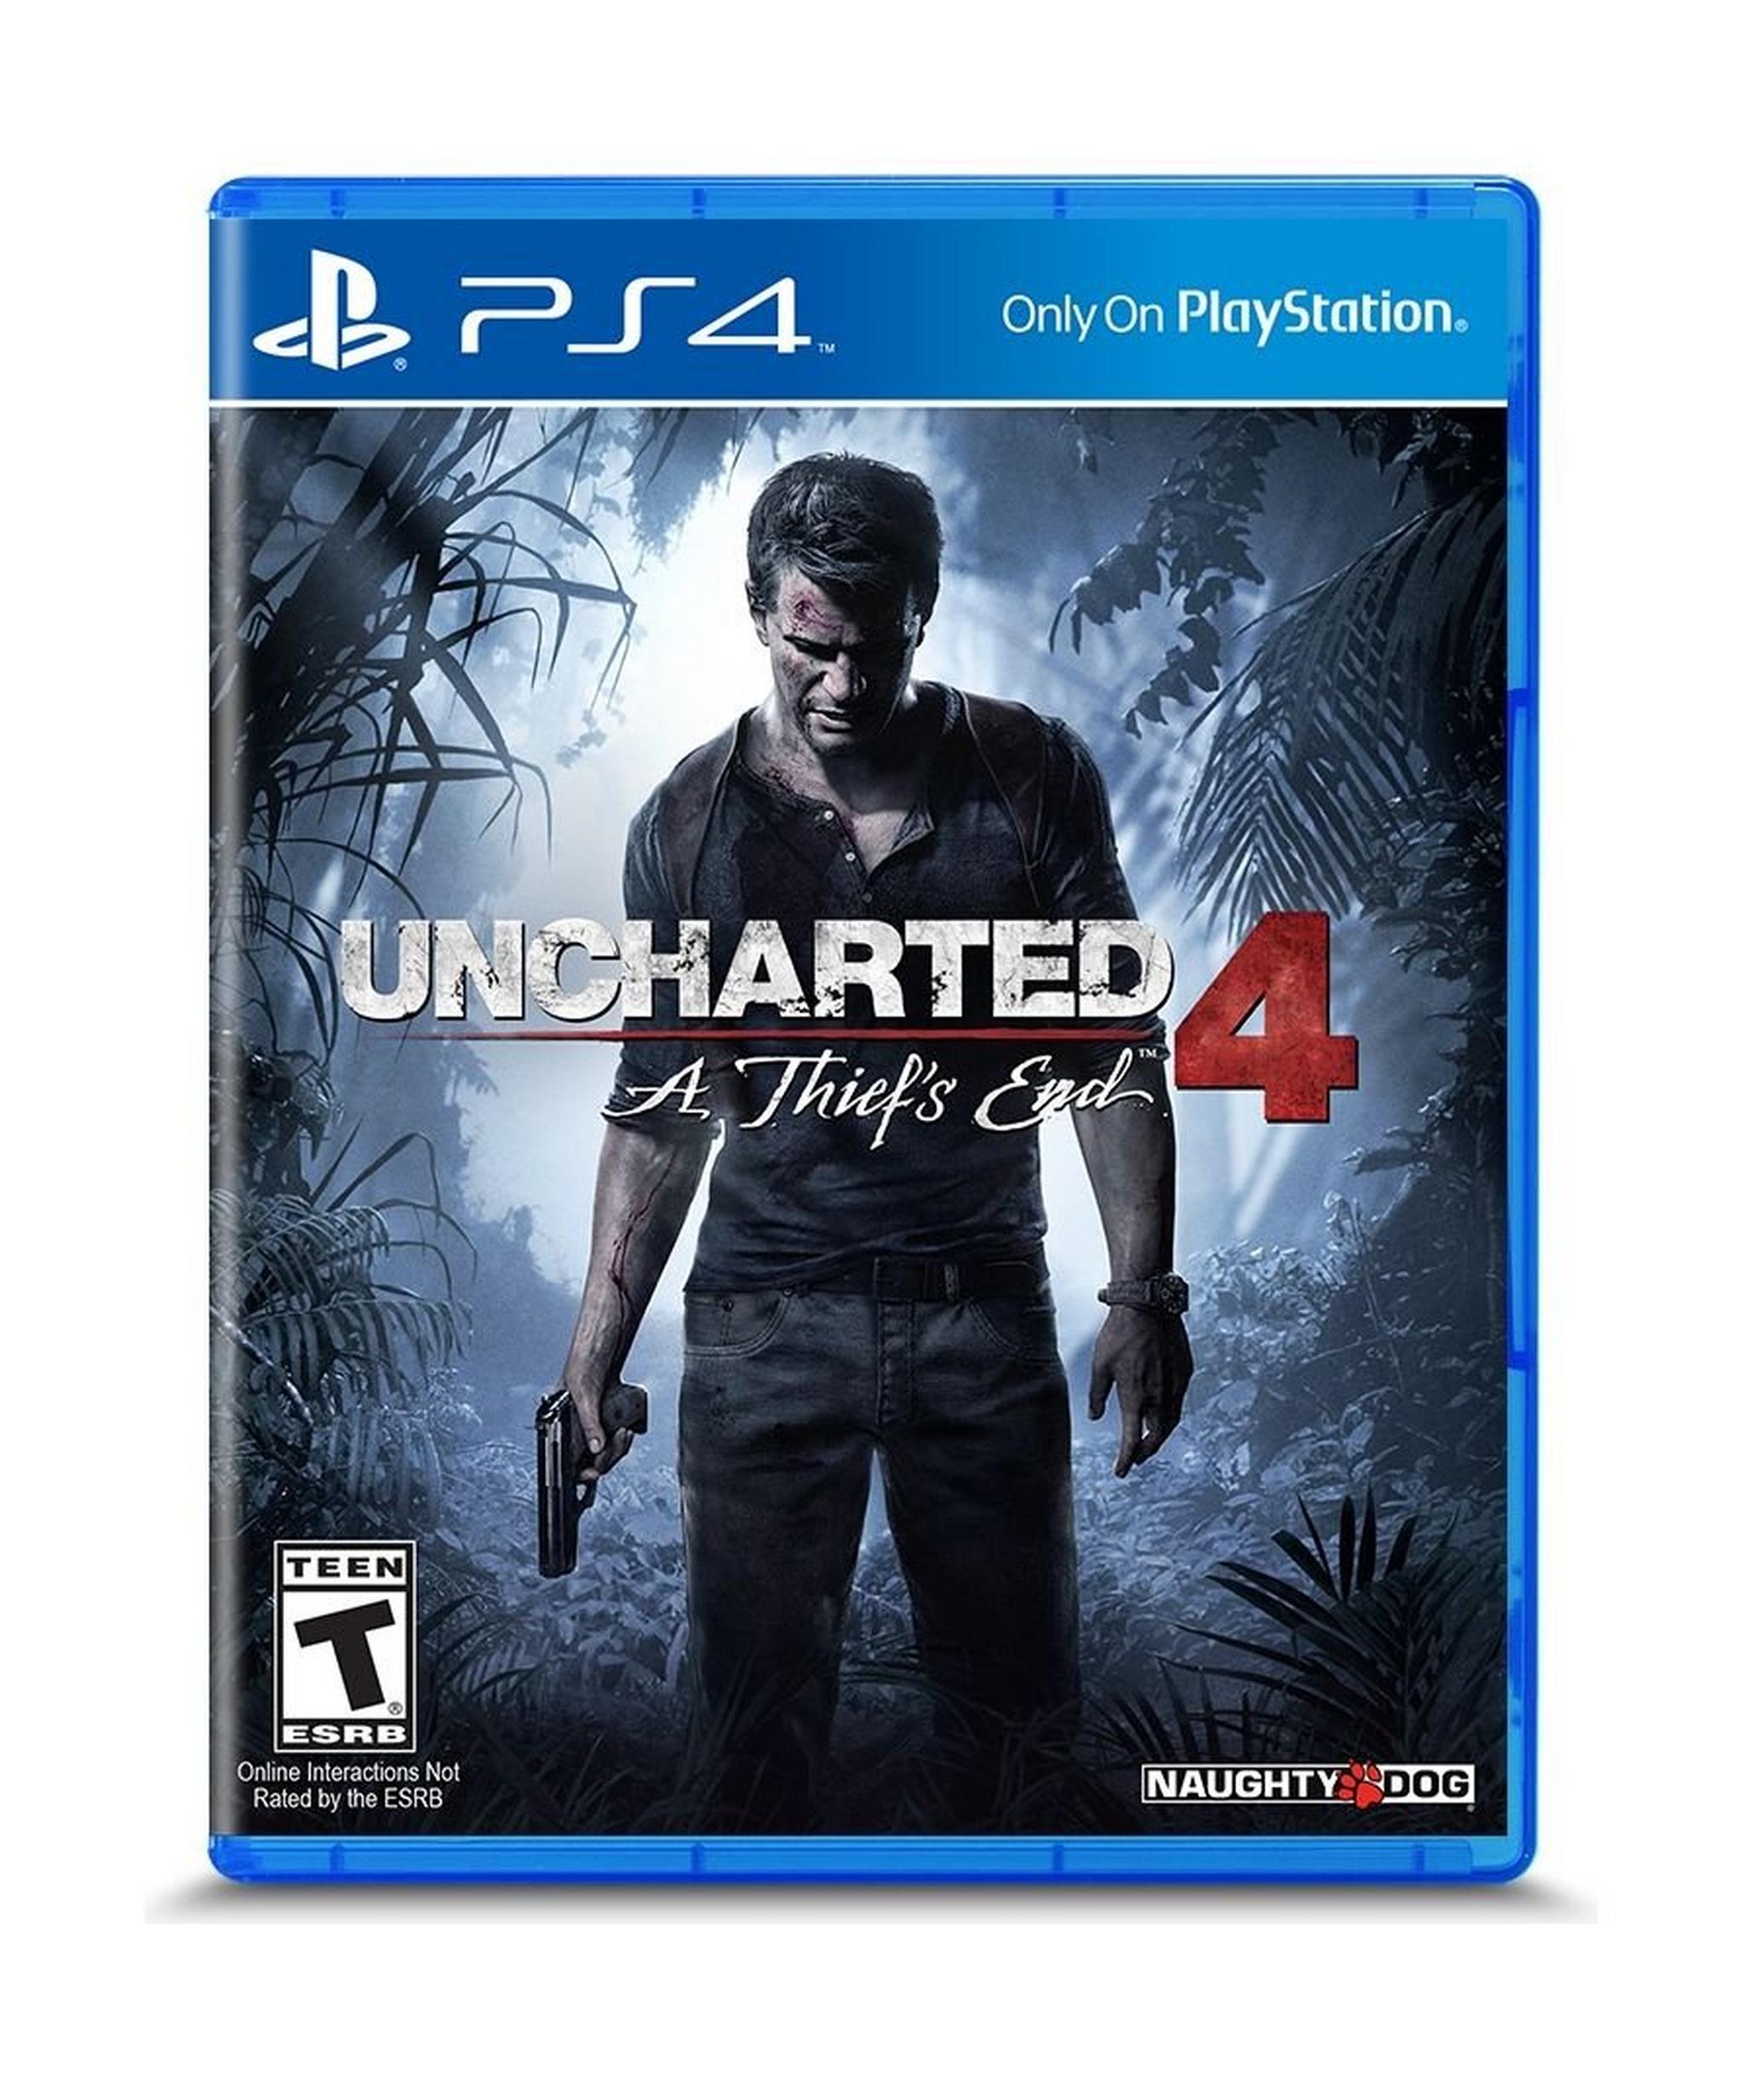 Sony PS4 Slim 500GB Console(NTSC) + Uncharted 4 PS4 Game + Sony PlayStation 4 DS4 Controller + Homefront: The Revolution - PS4 Game